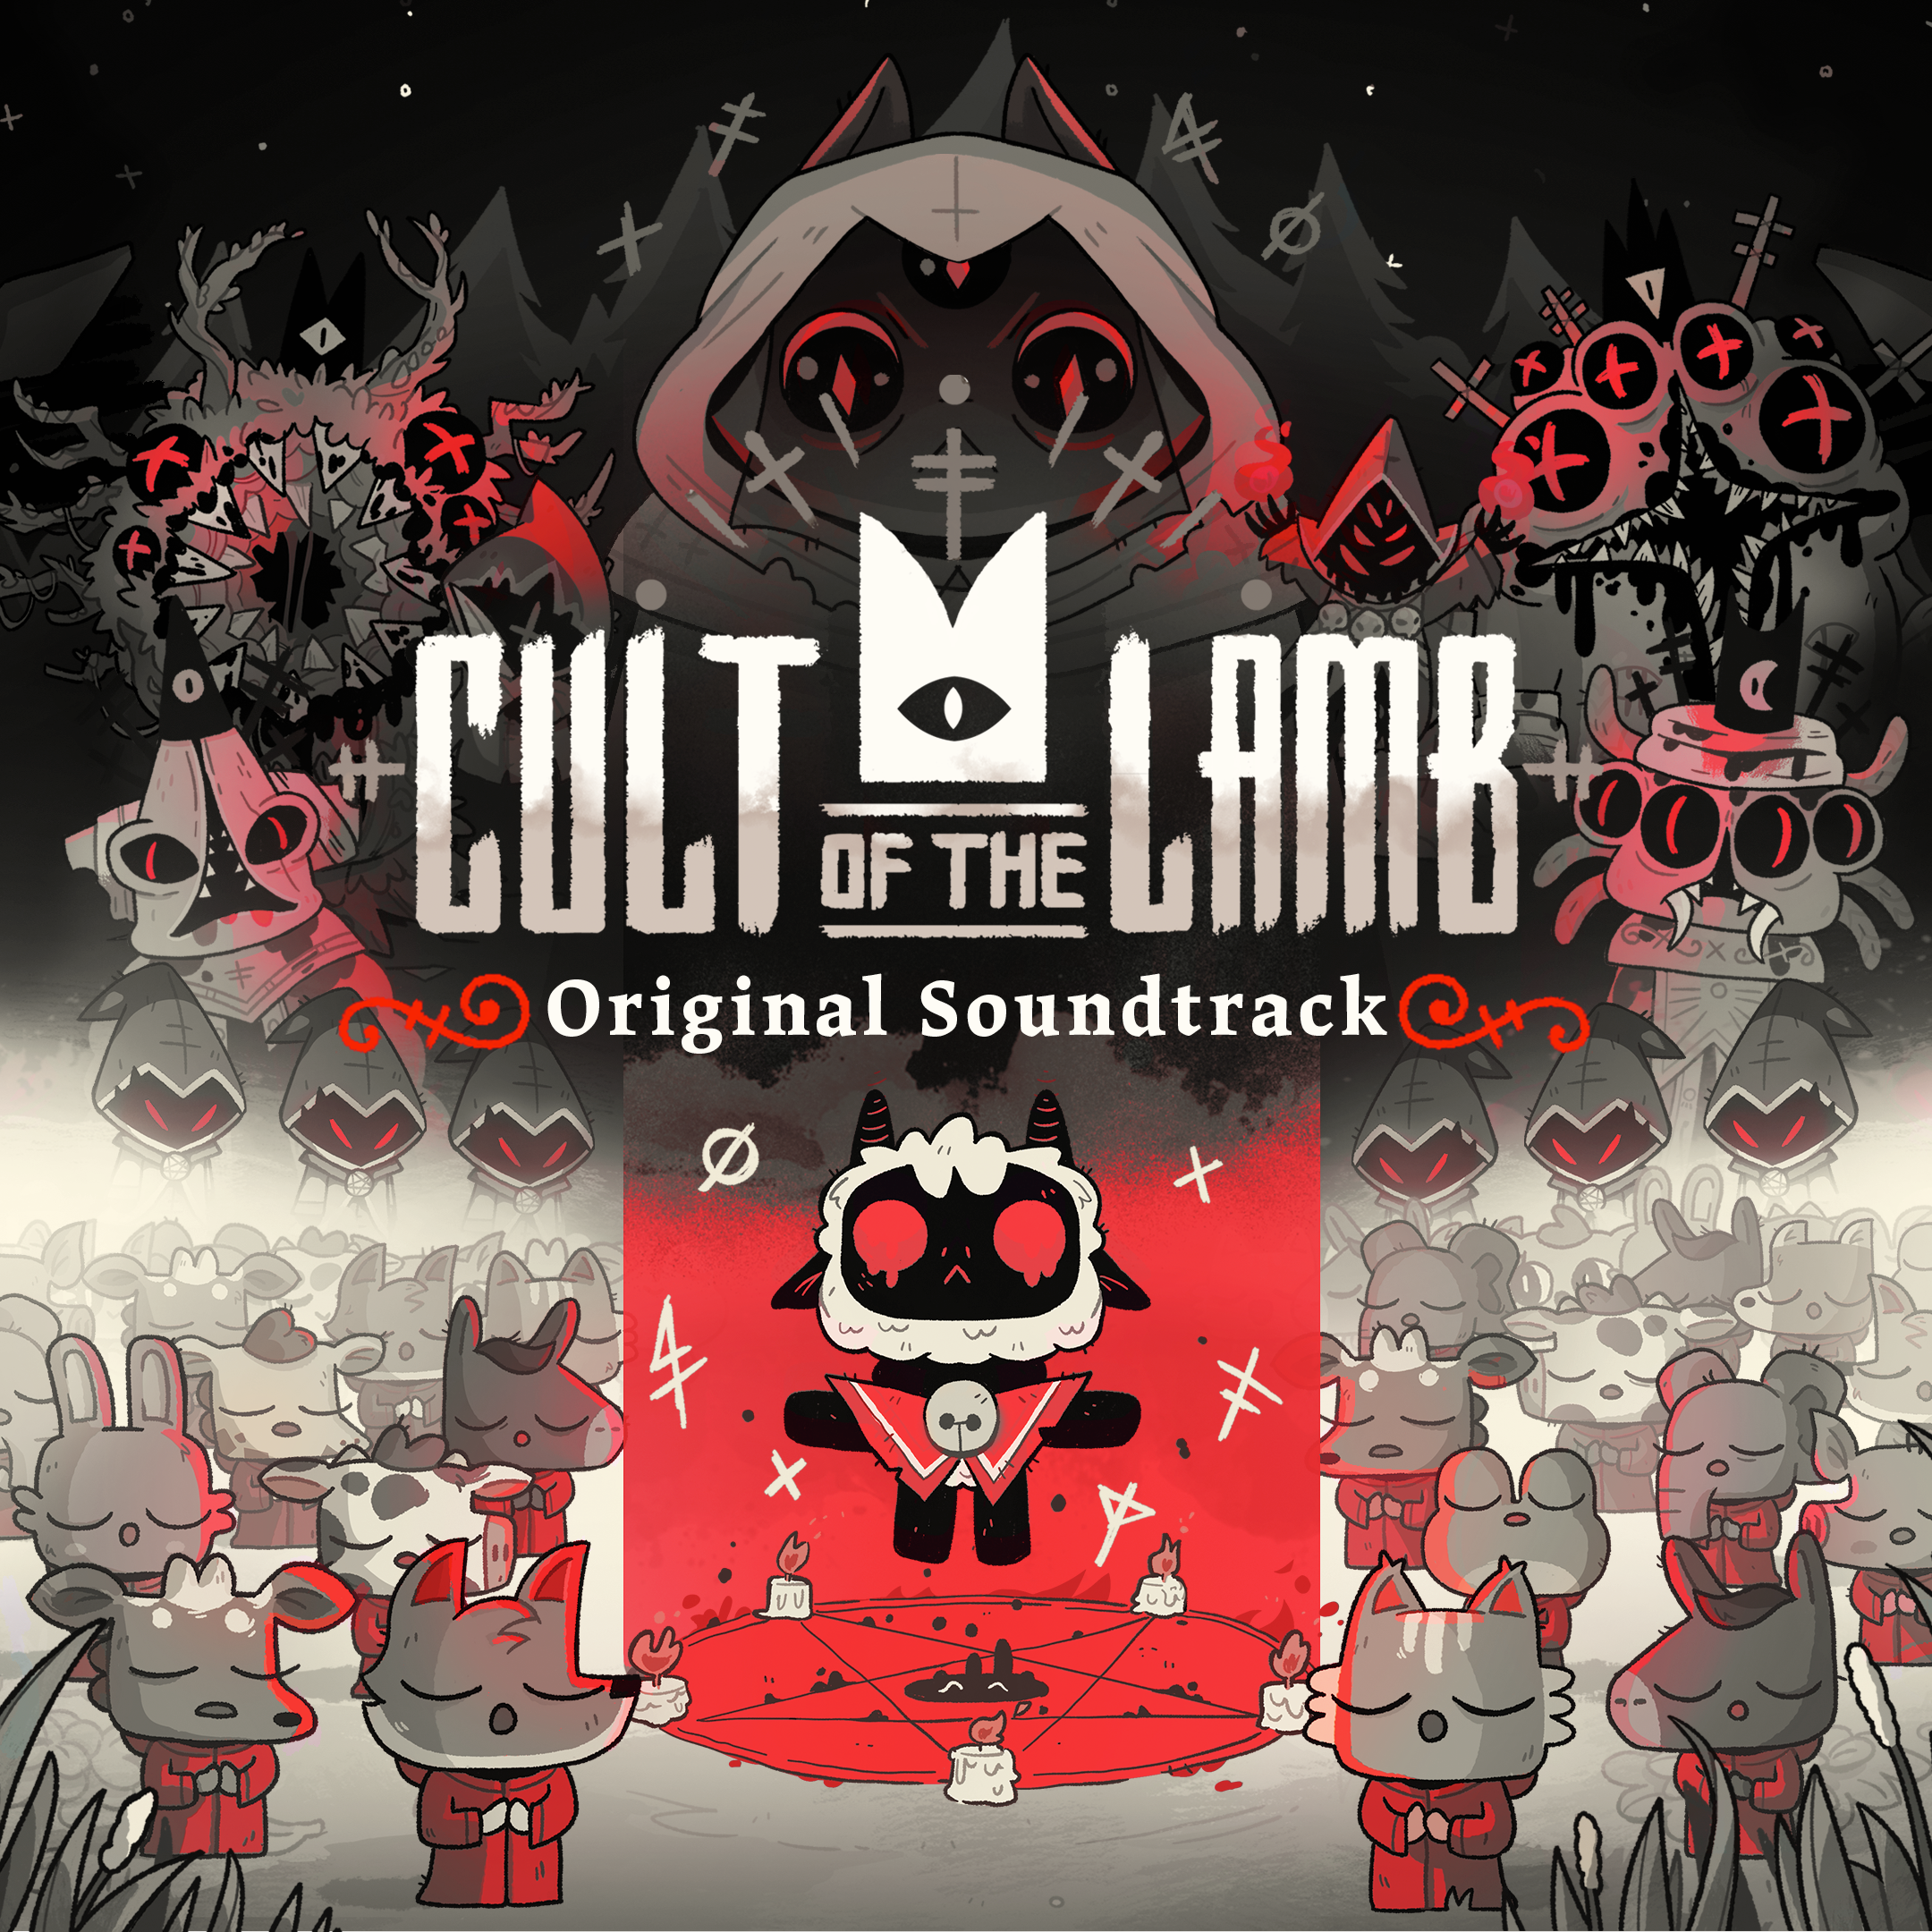 Xtha - In The Cult of the Lamb (Instrumental) MP3 Download